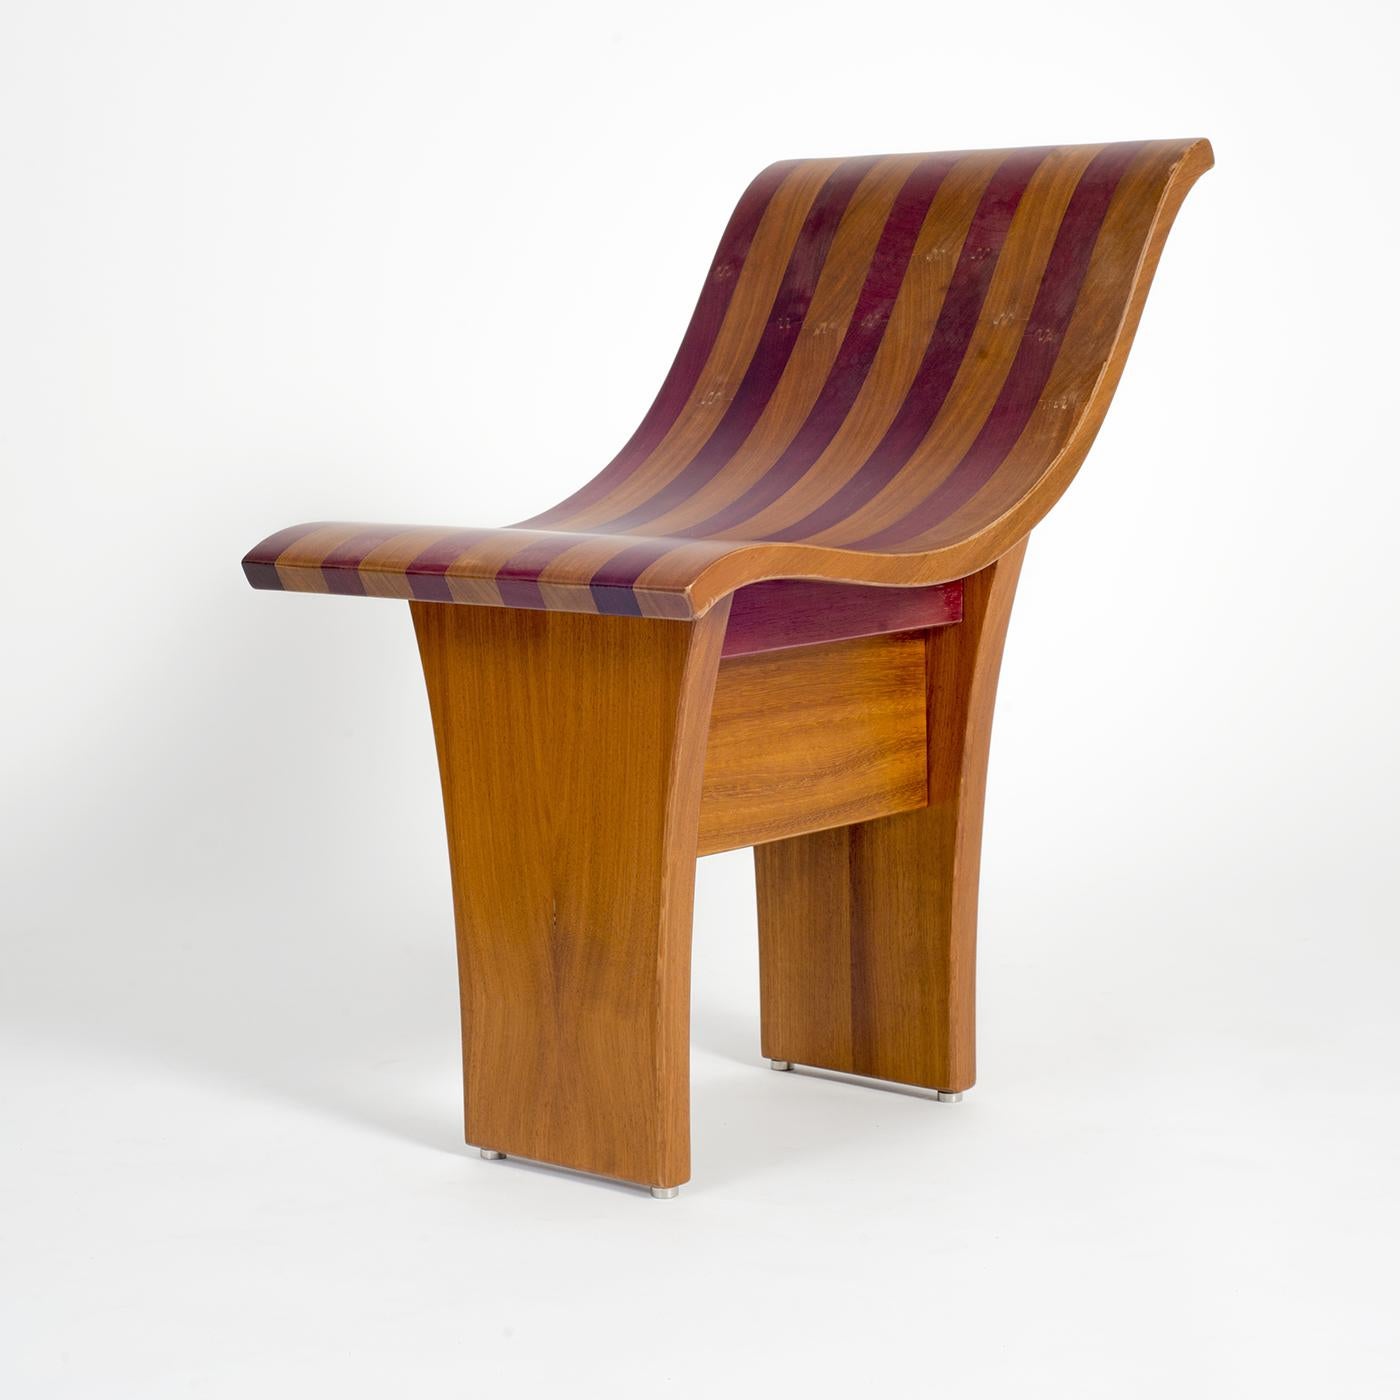 The linear forms of this modern chair merge functional style with comfort for a unique sitting experience. Framed in solid wood, the wide seat and contoured low back boast iroko and purple woods, the colors recalling vintage drapes. The chair stands